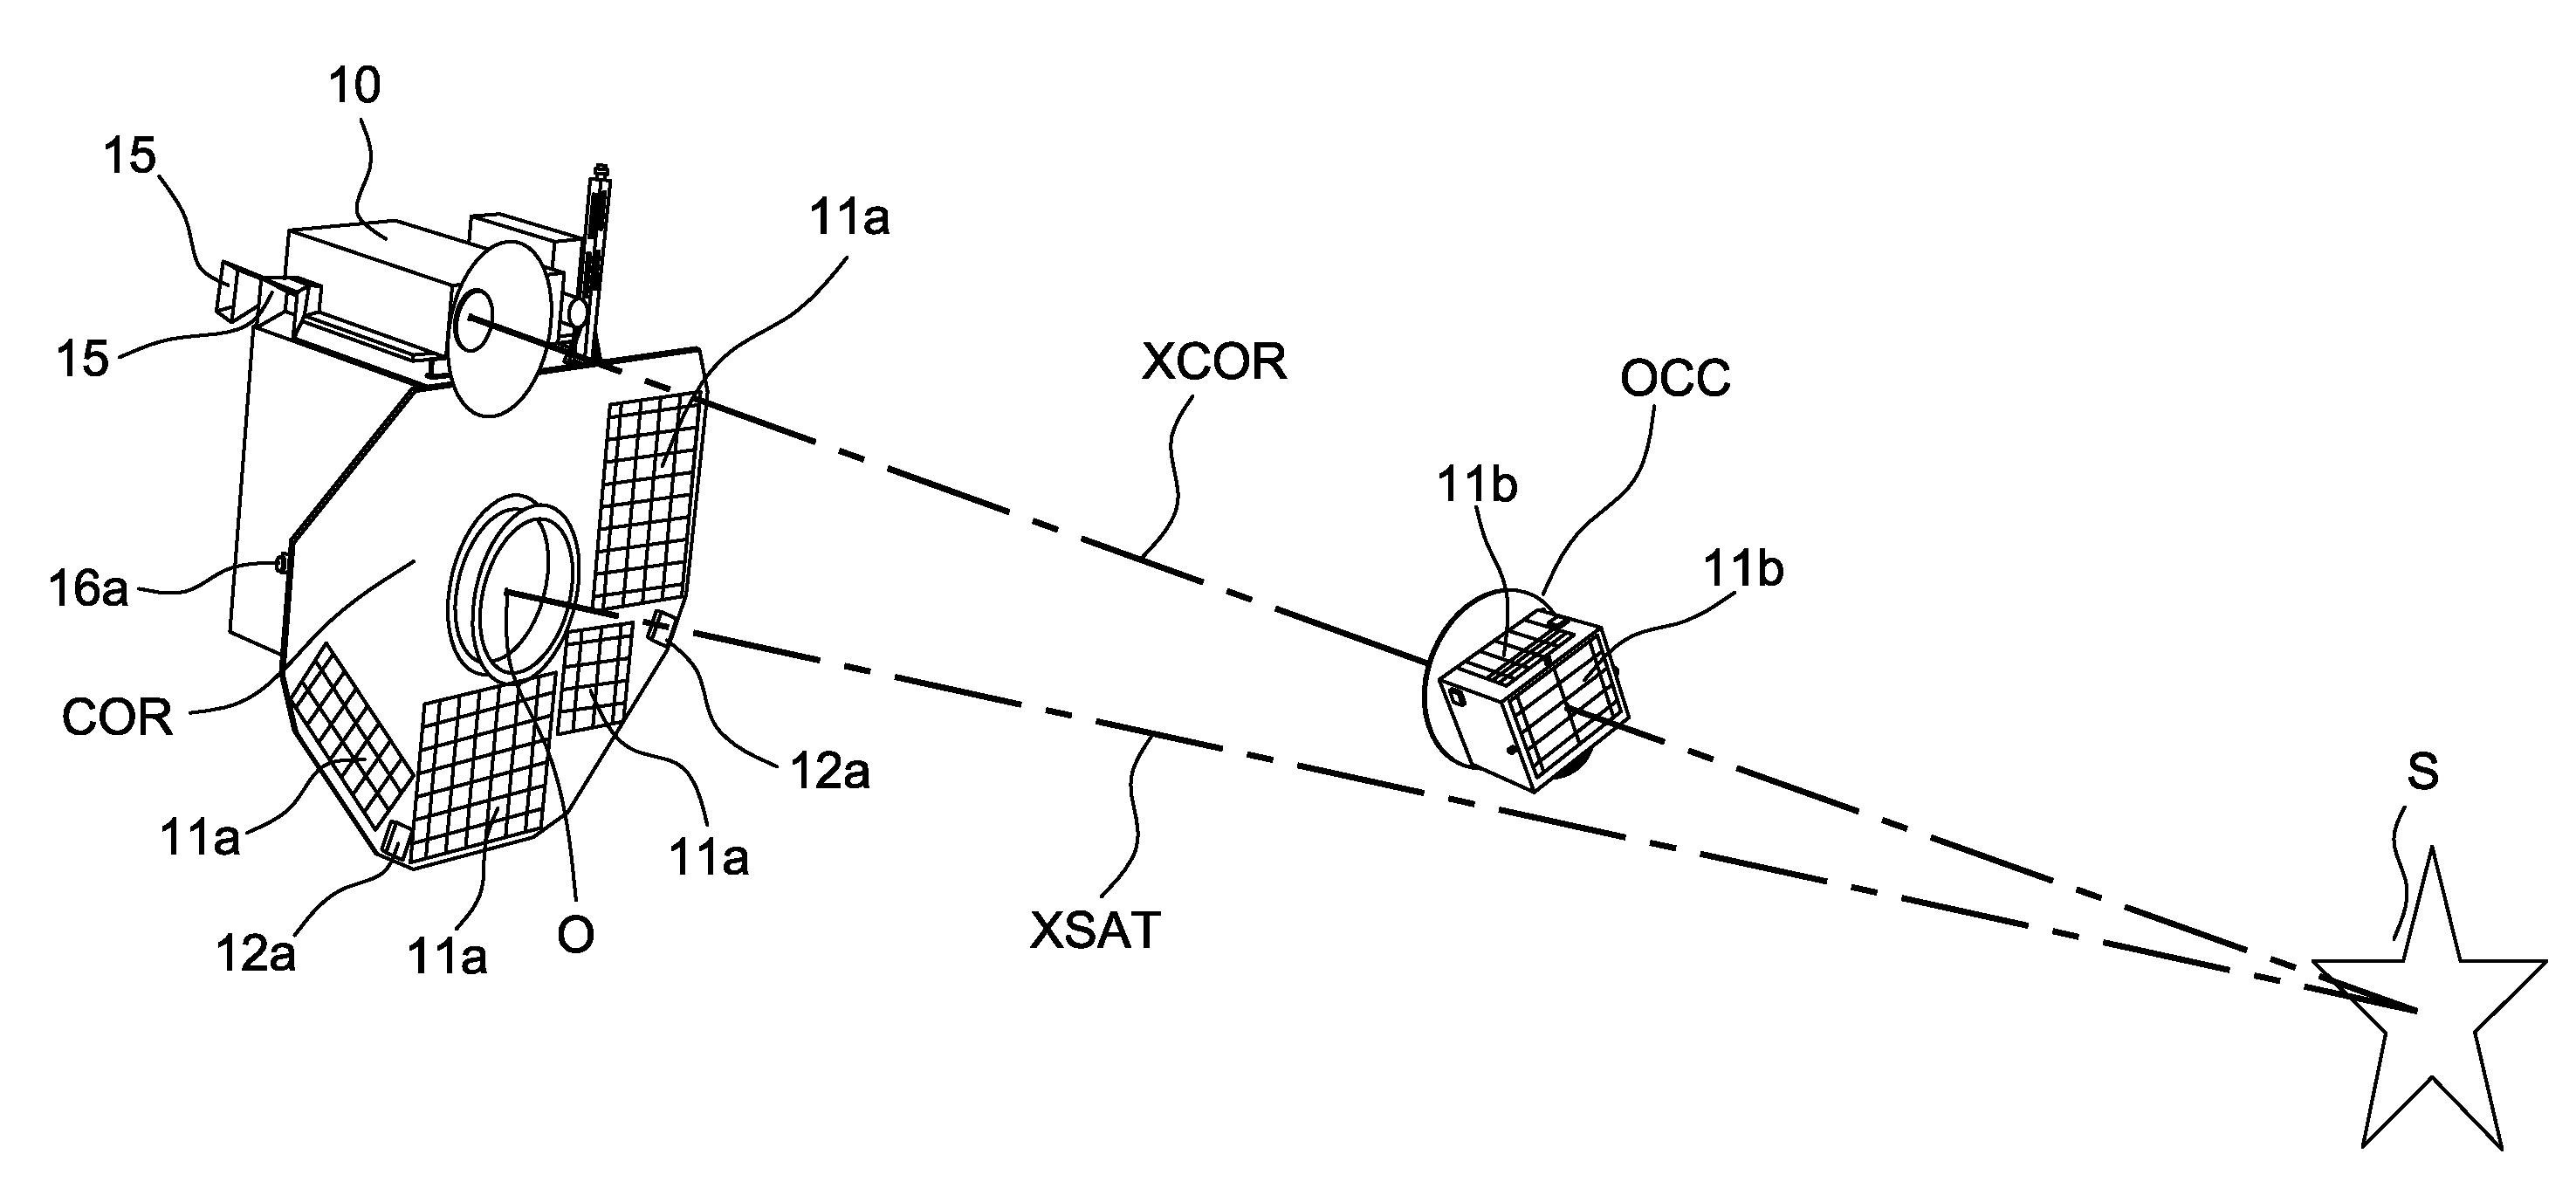 Formation flight device intended for a solar coronagraphy mission